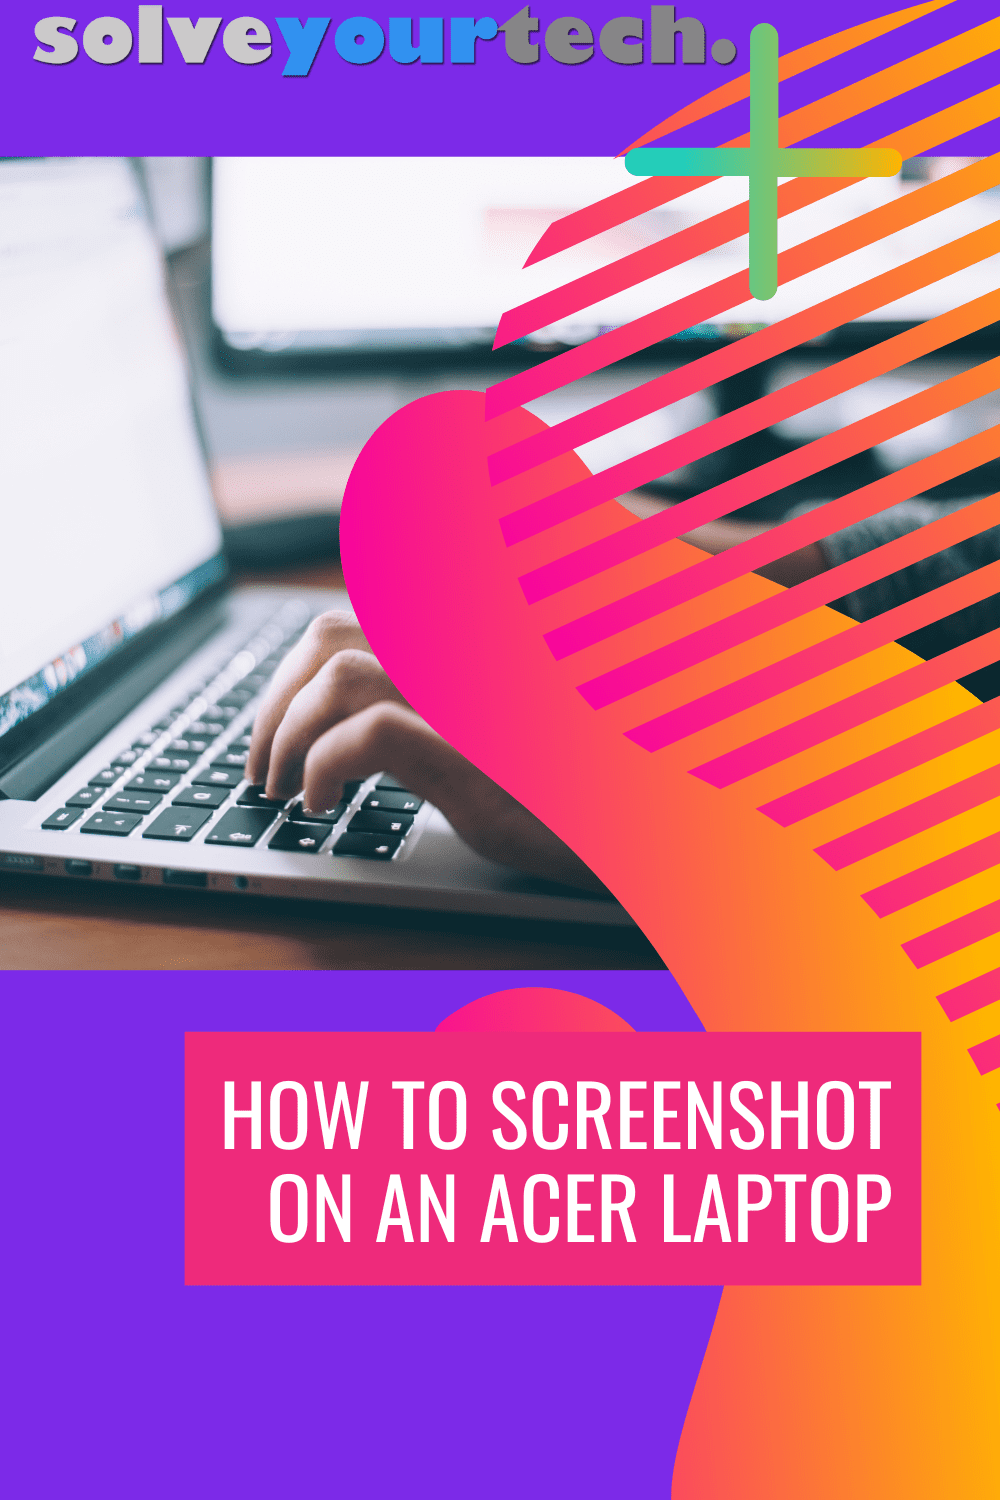 How to Screenshot on Acer Laptop - Solve Your Tech